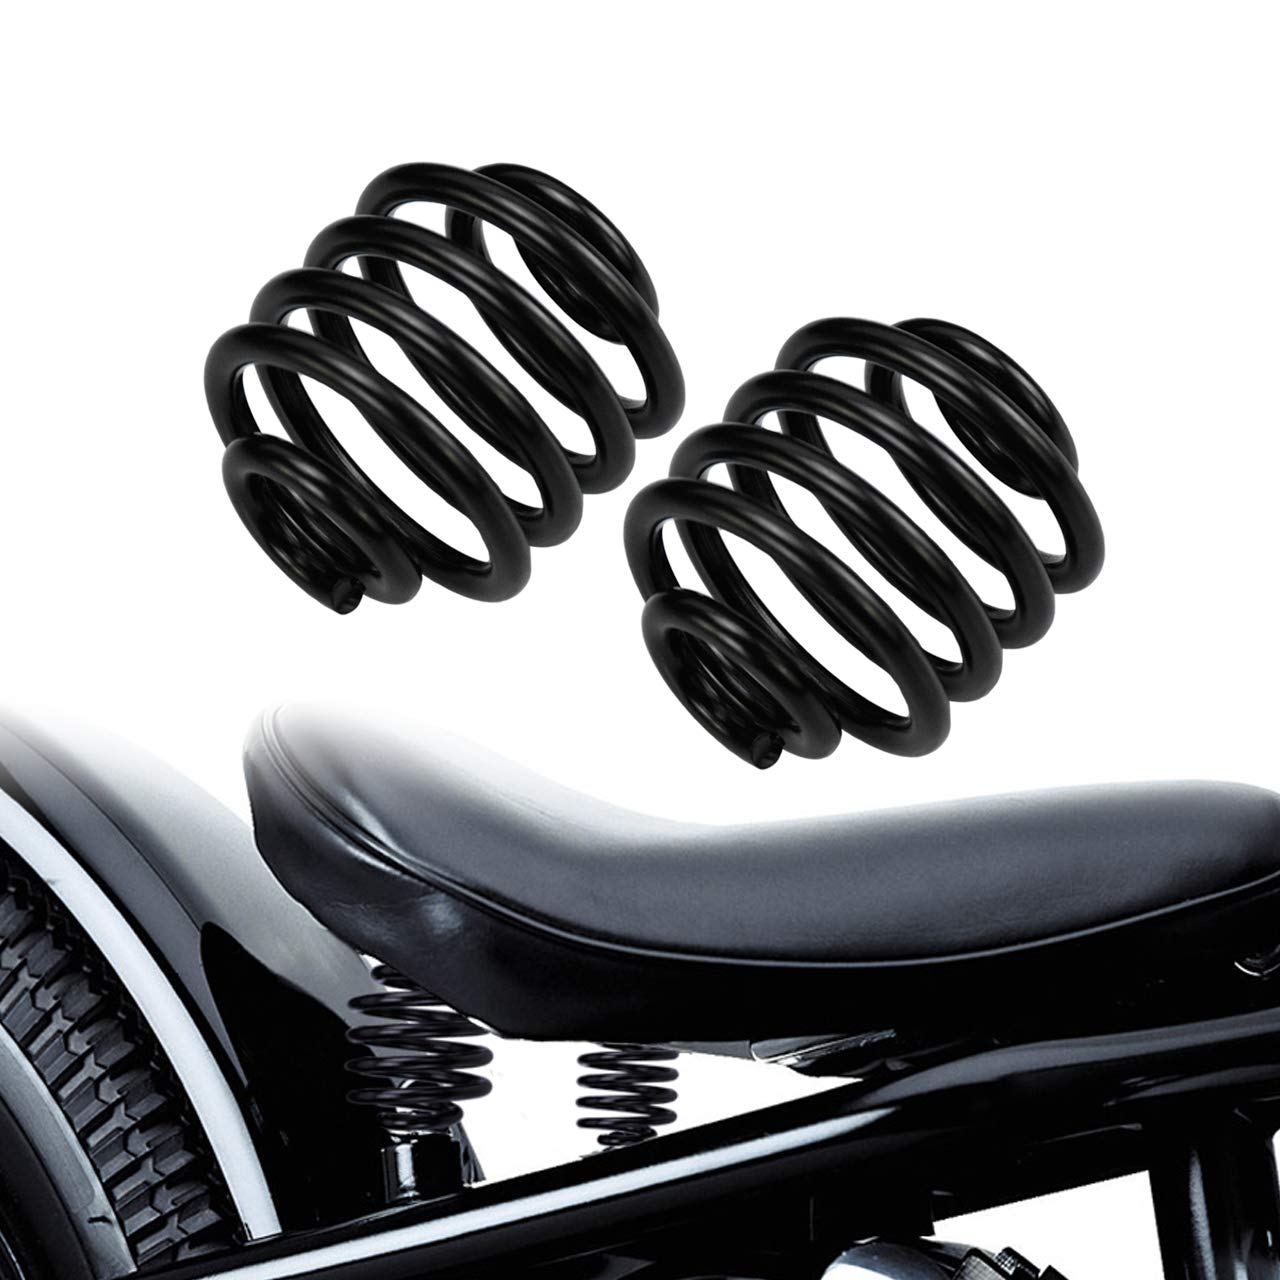 HDBUBALUS Motorcycle Solo Seat Springs Mounting 2 Inch Spring Bracket Hardware Mount Kit Fit for Harley Sportster Softail XL 883 1200 Dyna Fatboy Bobber Black 1 Pair von HDBUBALUS